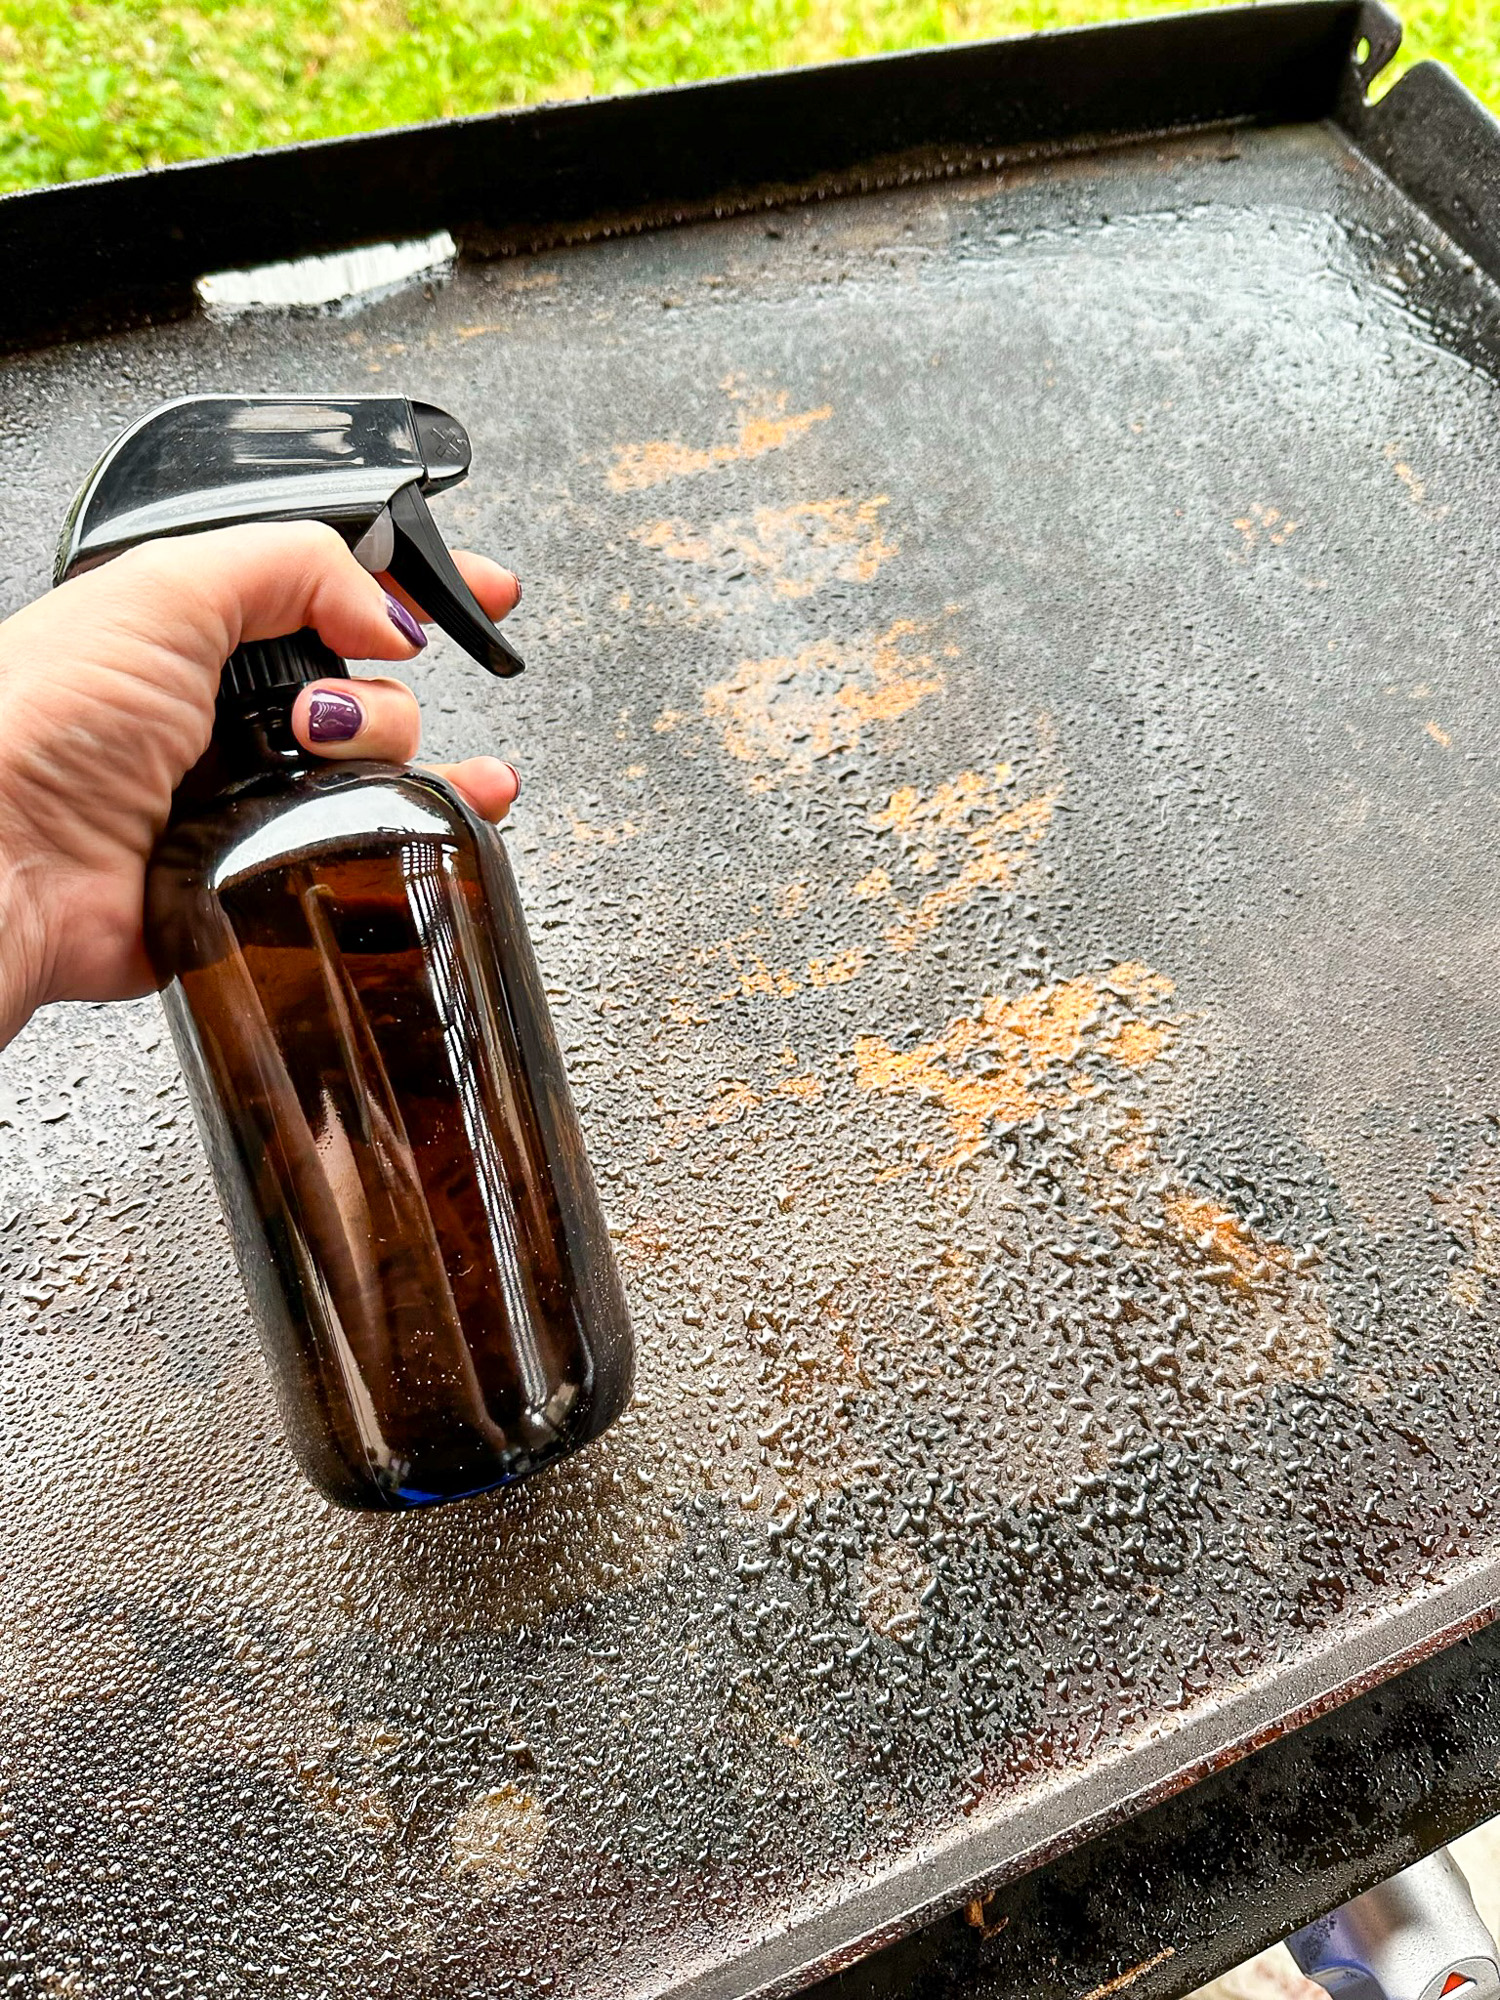 A rusted griddle sprayed lightly with vinegar from an amber spray bottle.